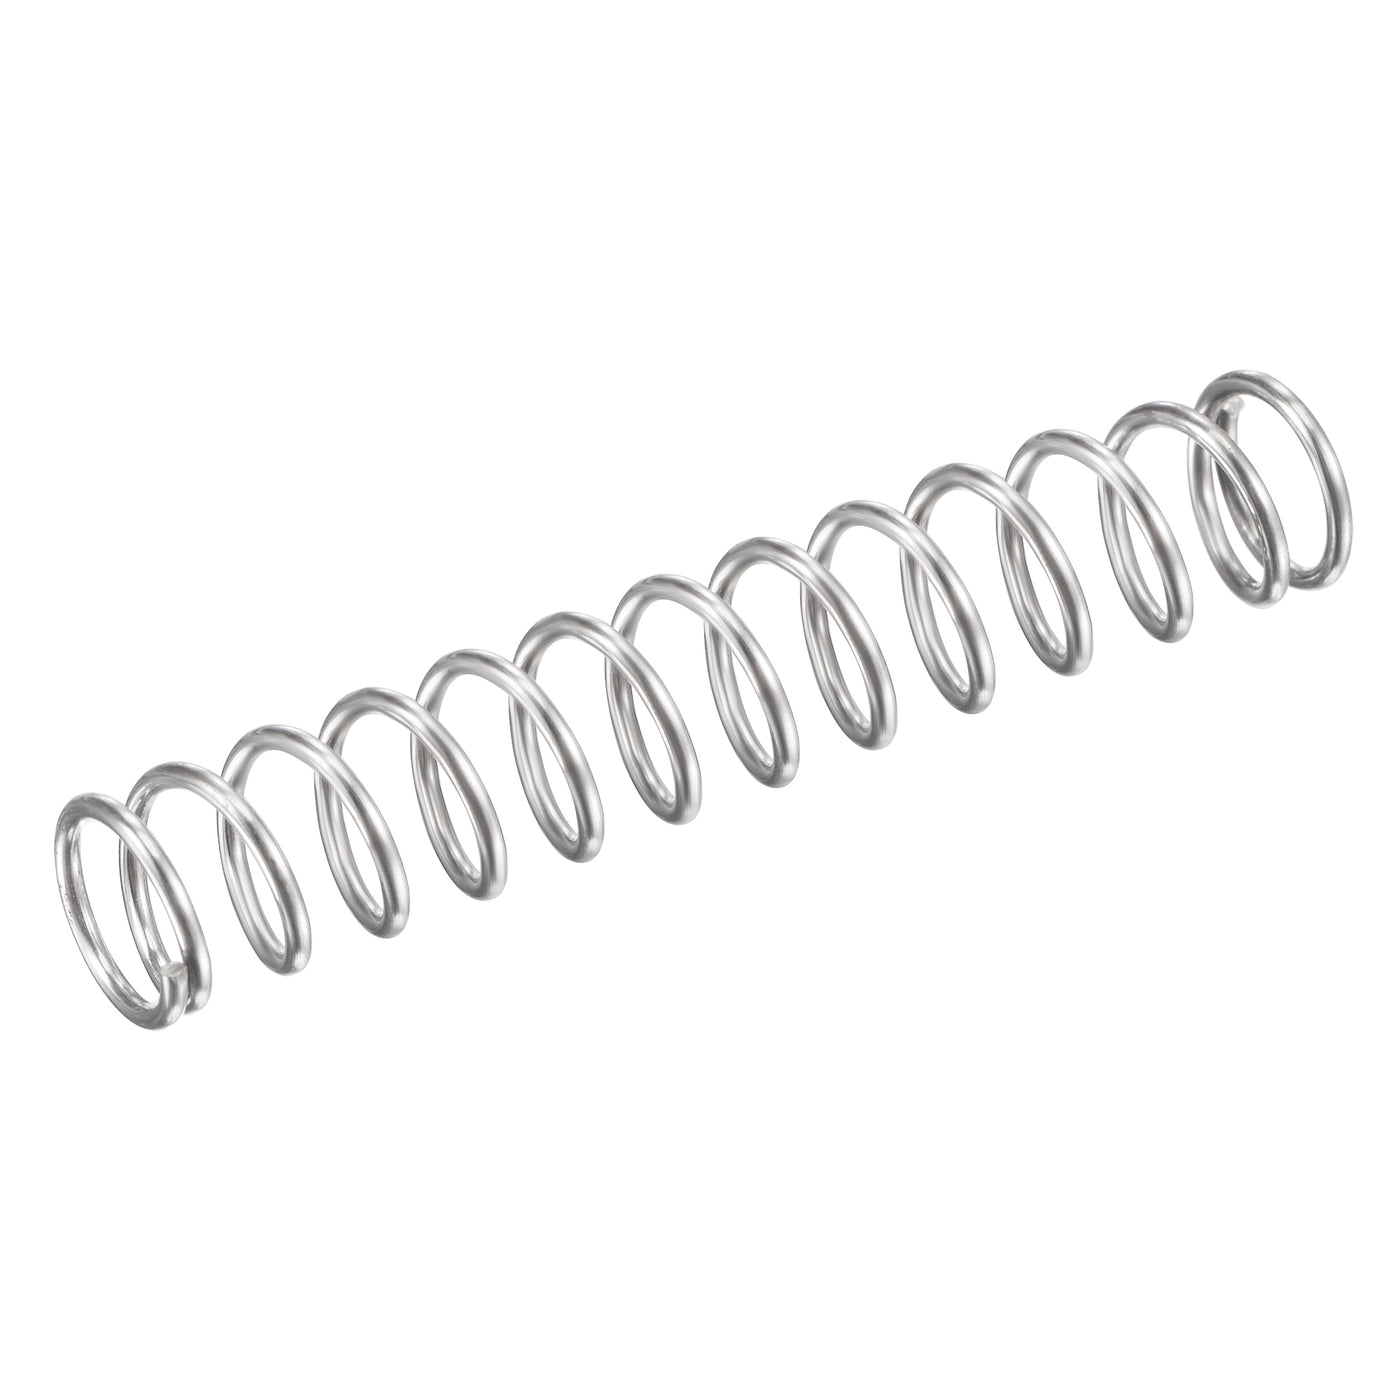 uxcell Uxcell 9mmx1mmx50mm 304 Stainless Steel Compression Spring 31.4N Load Capacity 20pcs